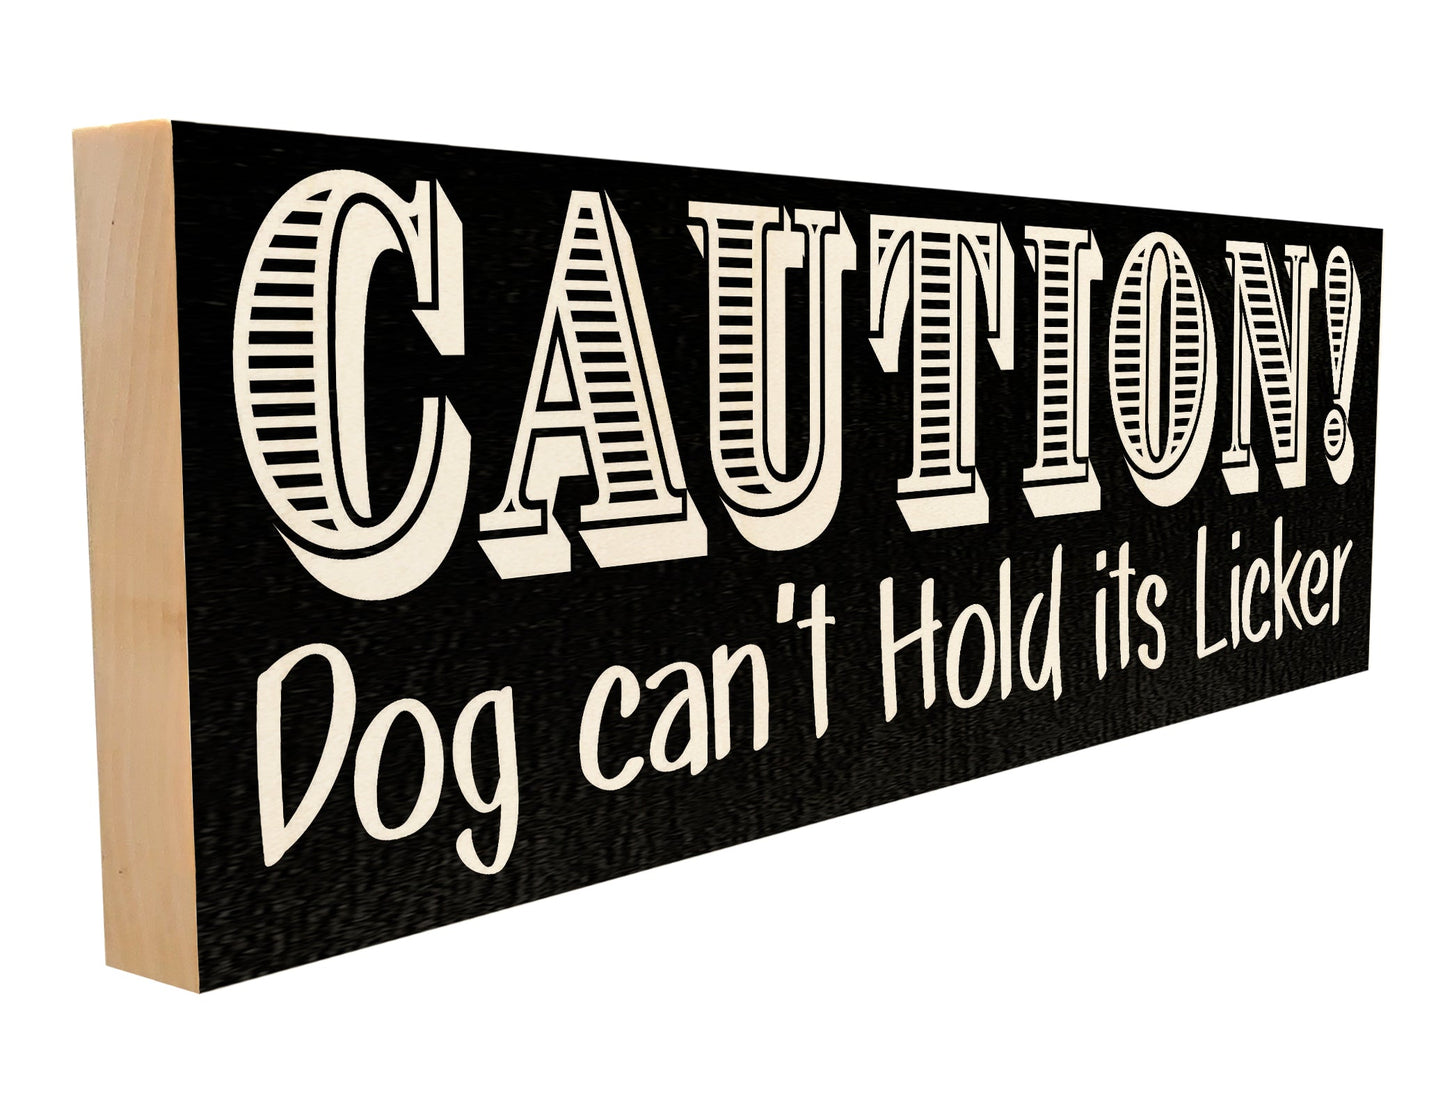 Caution. Dog Can't Hold Its Licker.